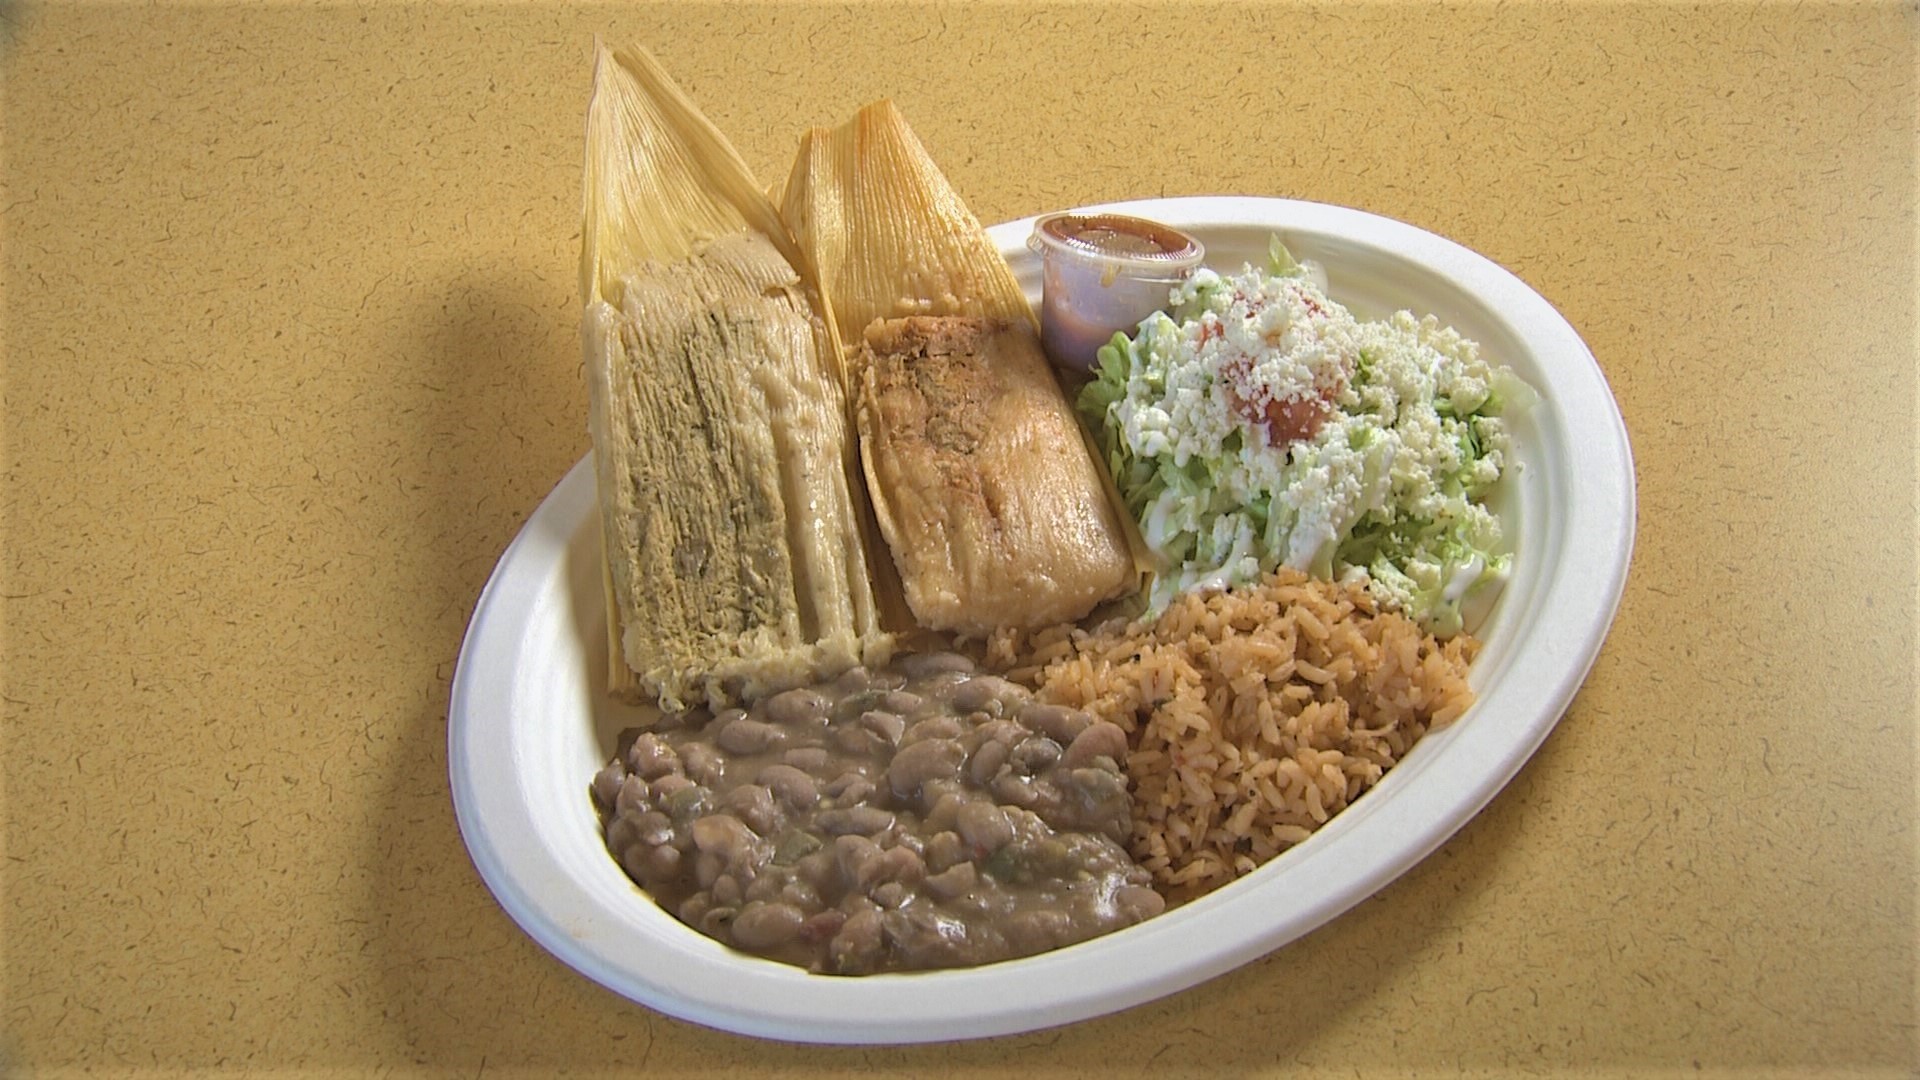 New Mexico Tamale Company serves authentic flavors using the owner's family recipes.